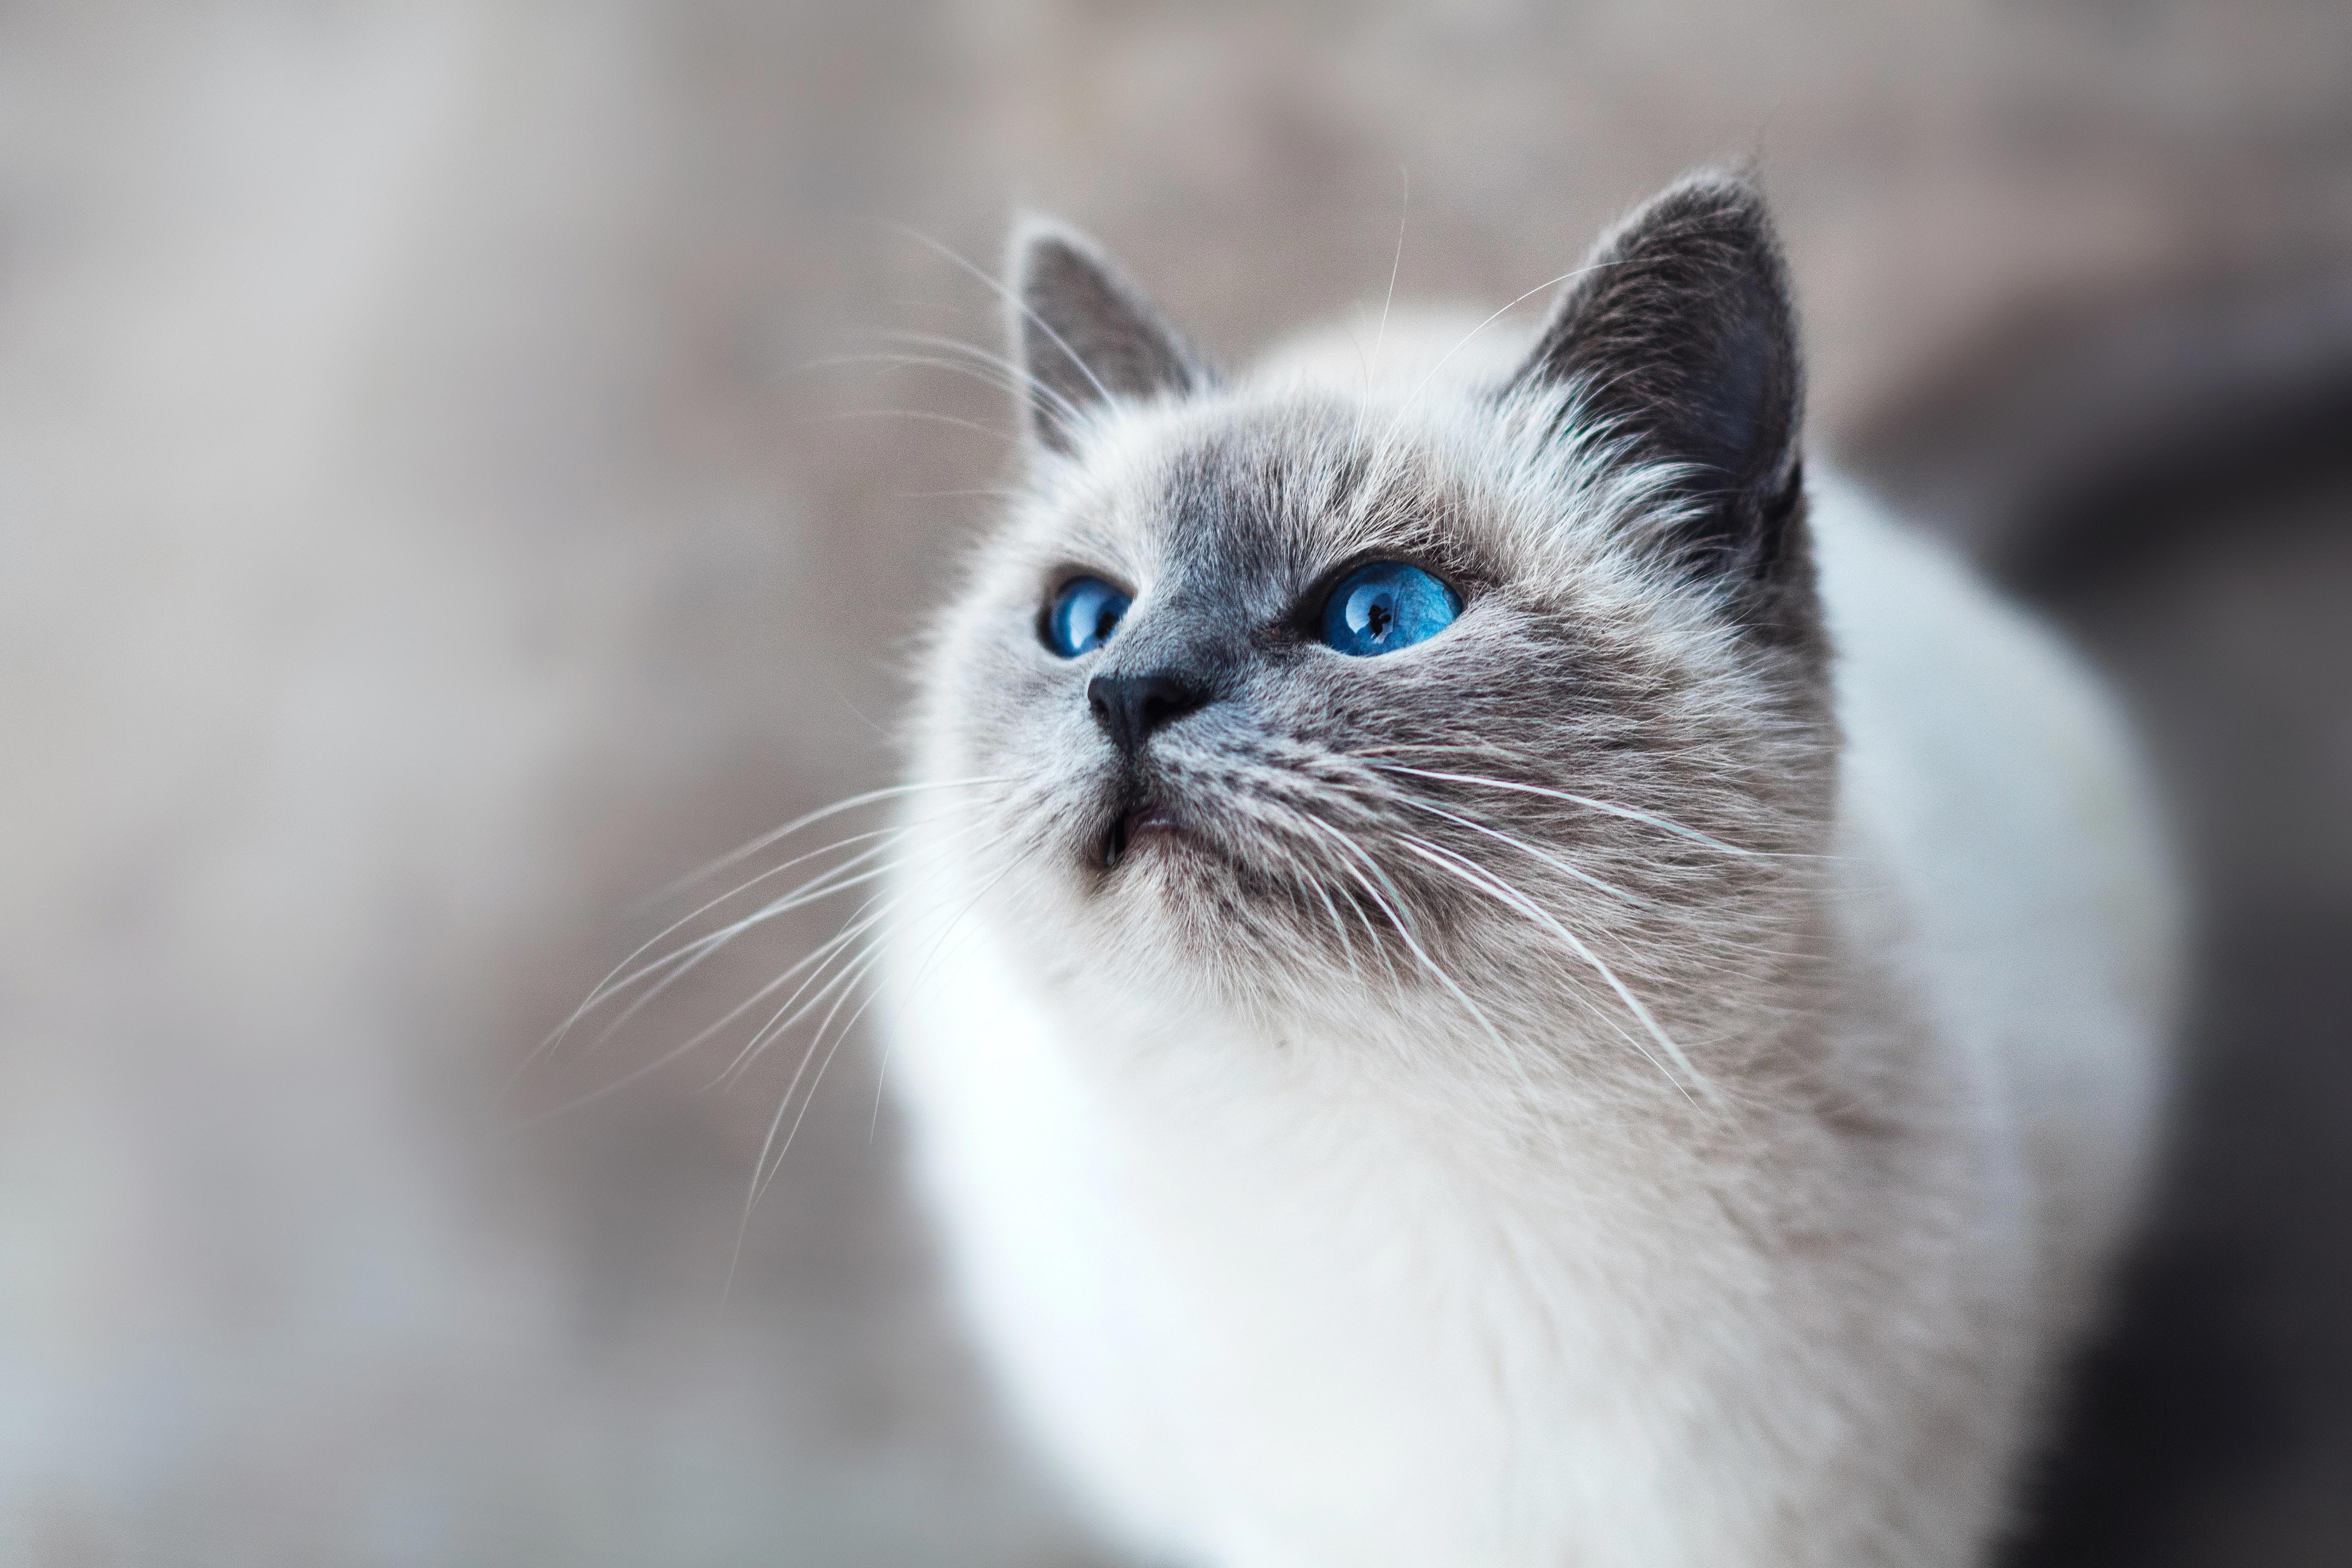 Troubleshooting Tips for When Your Cat Won't Eat